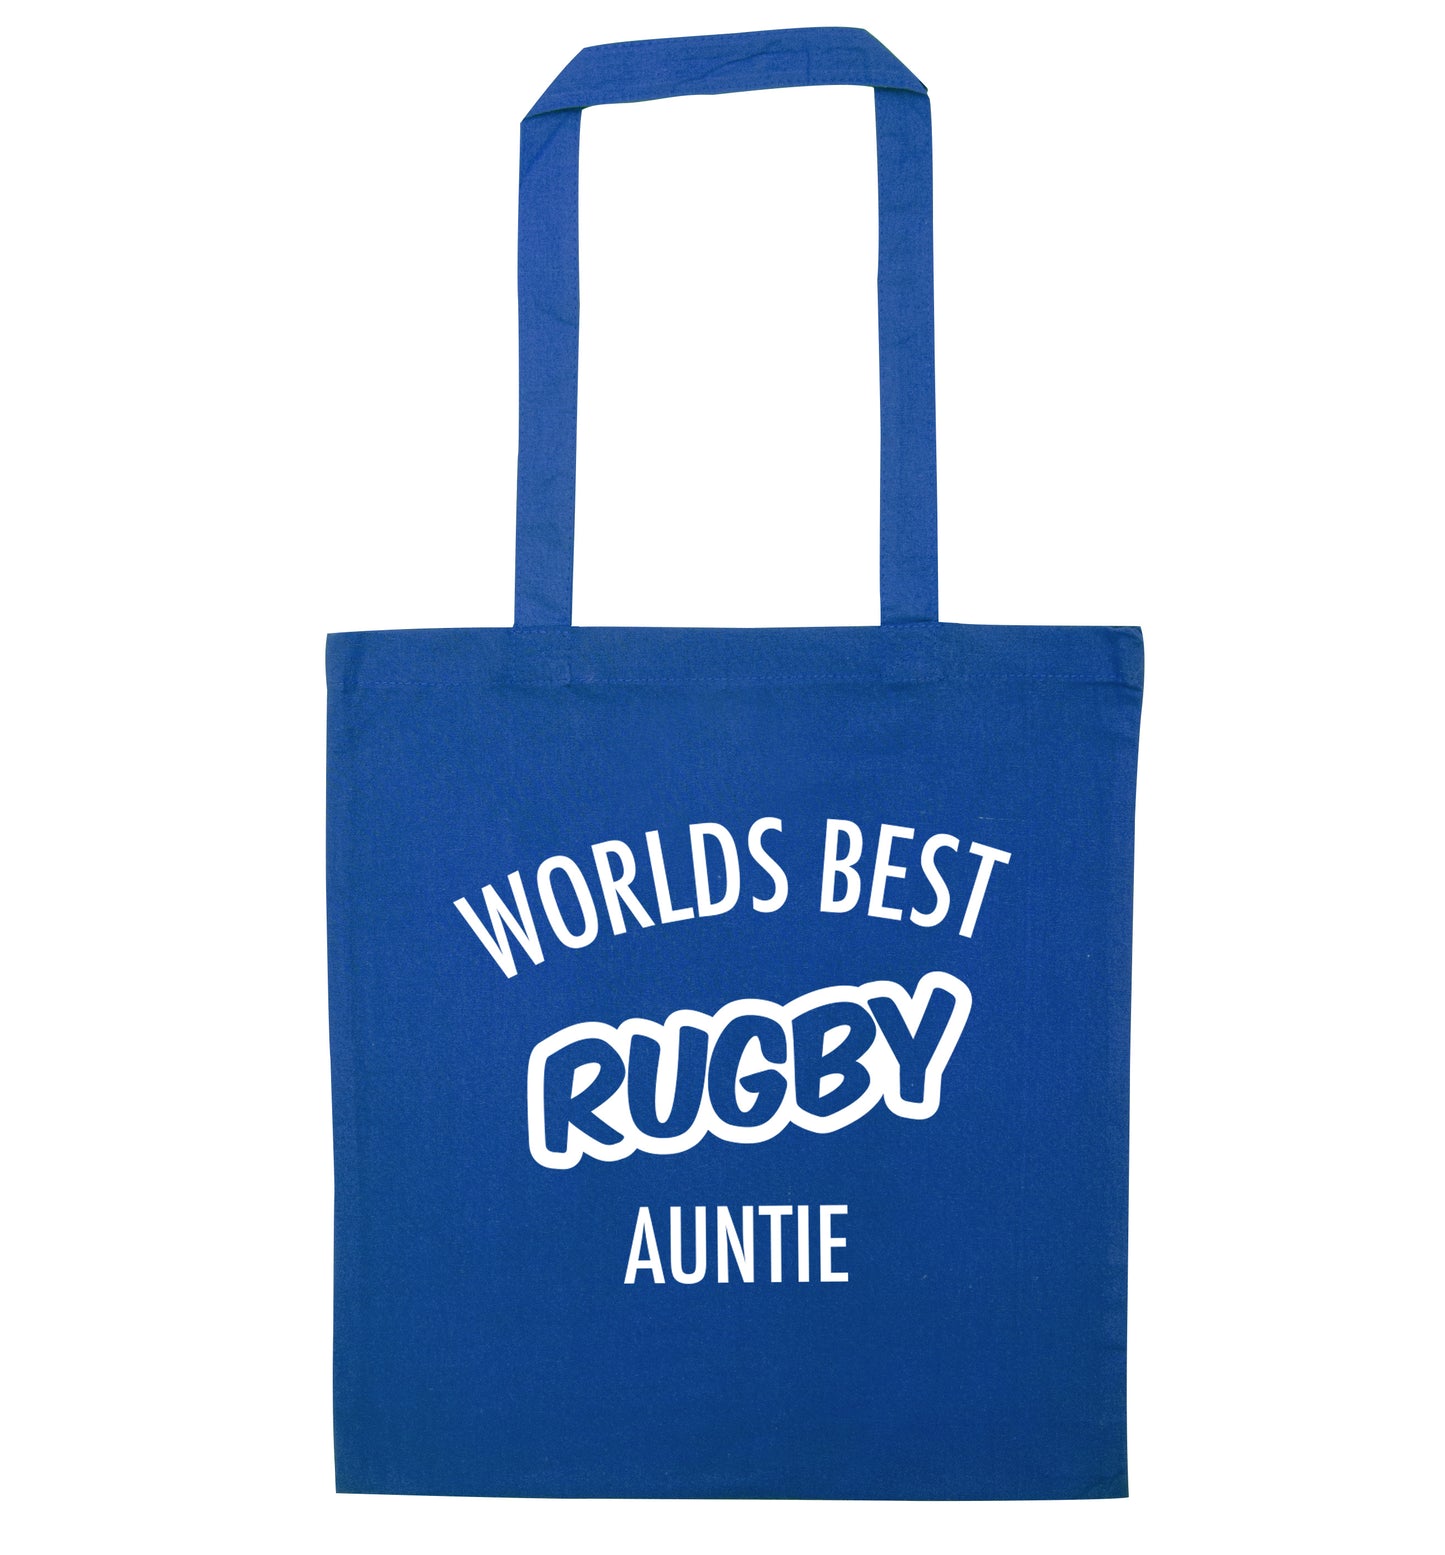 Worlds best rugby auntie blue tote bag